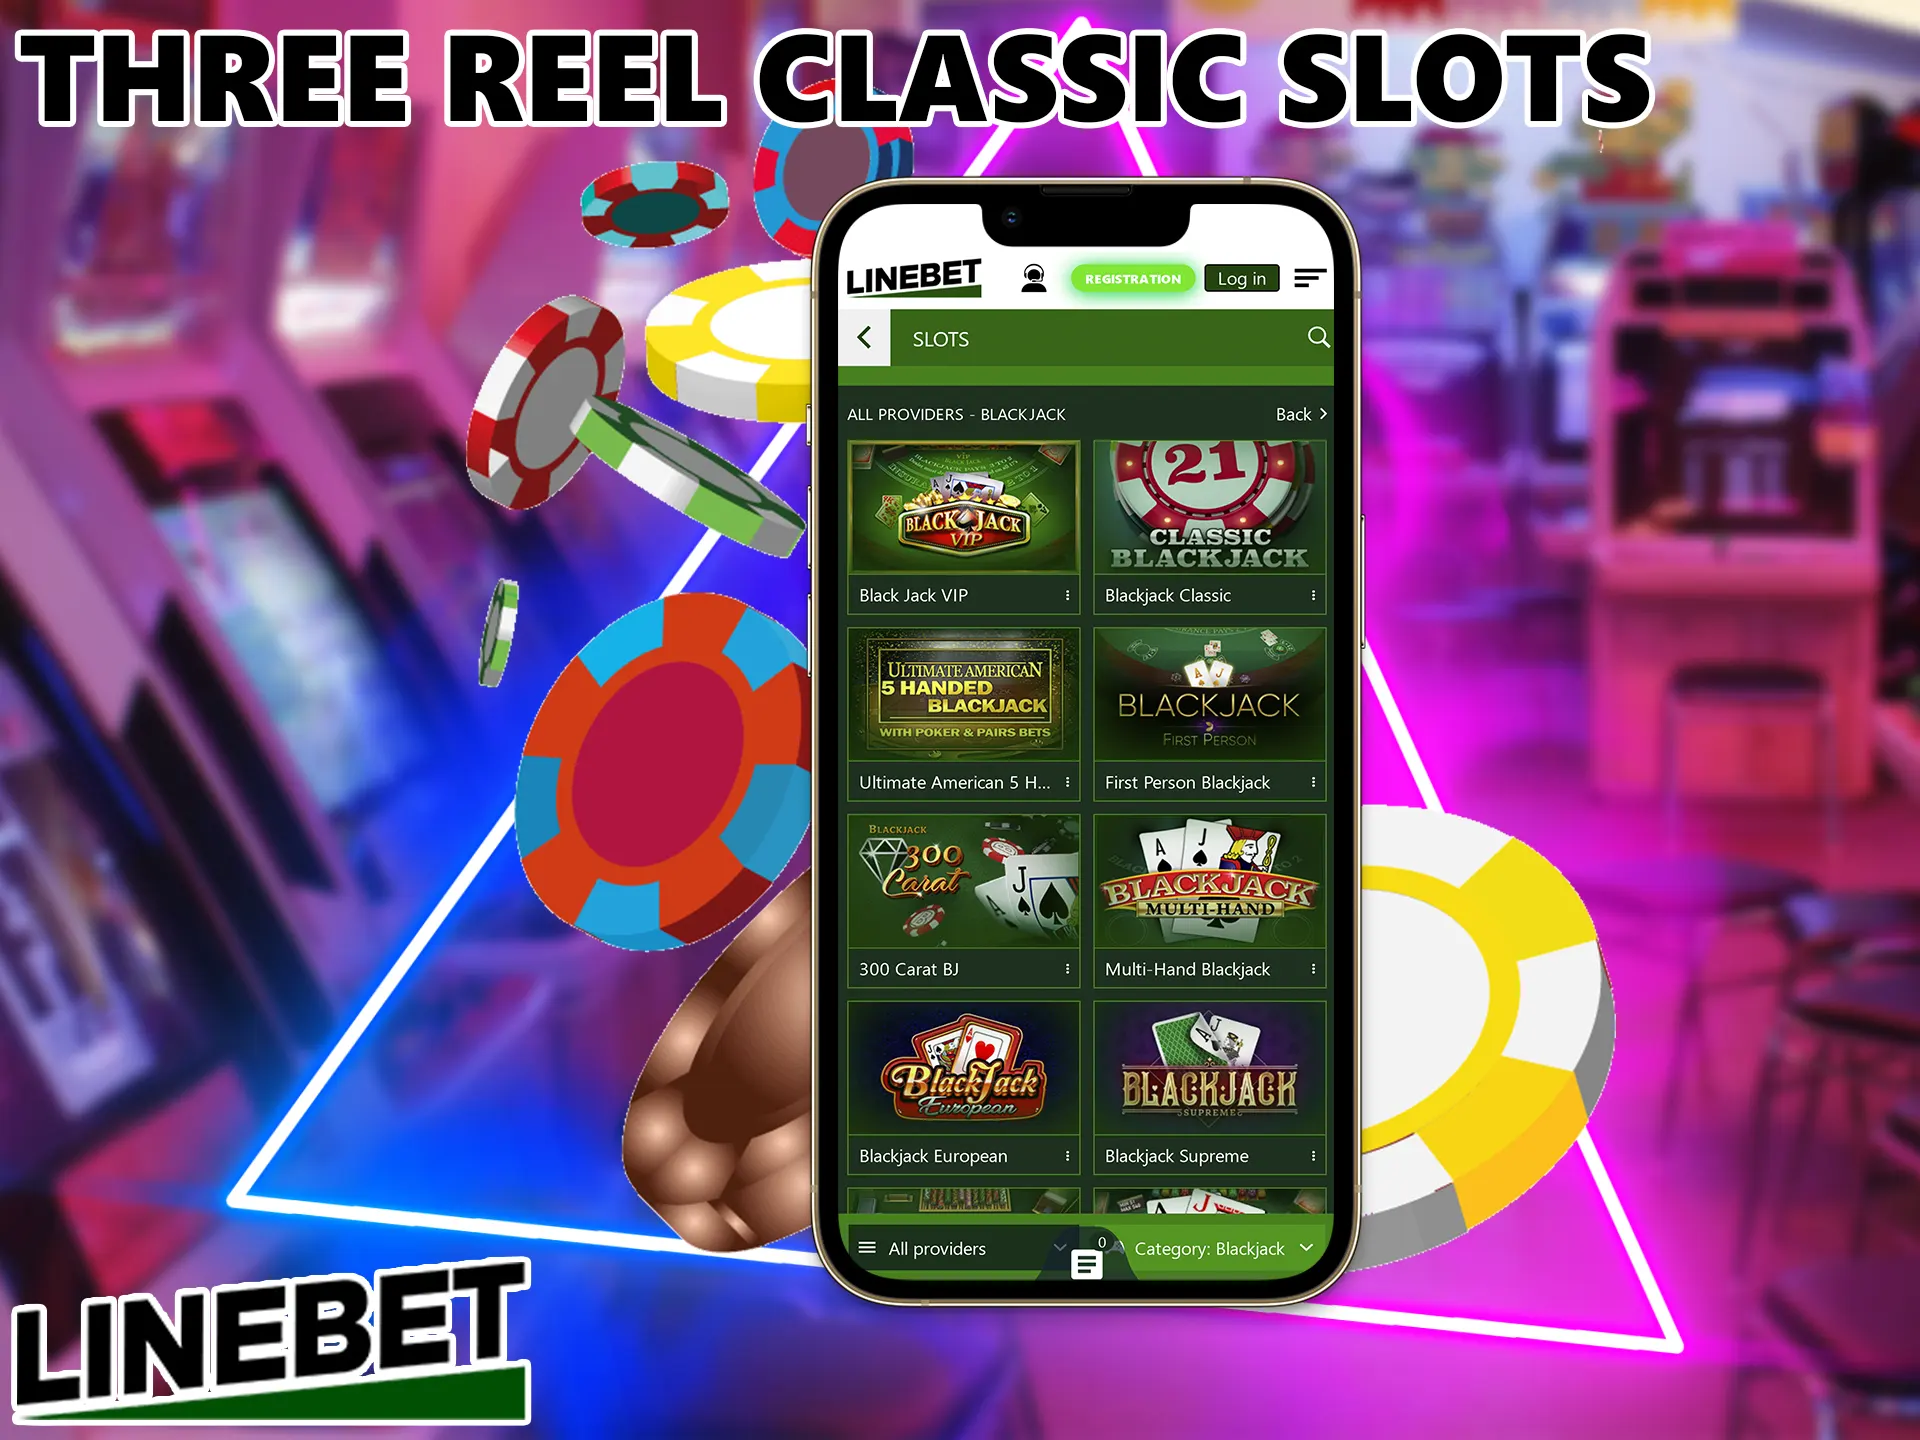 This is an example of the original slots, which is more advanced and adds more paylines, and many other features that will be of interest to Linebet players.